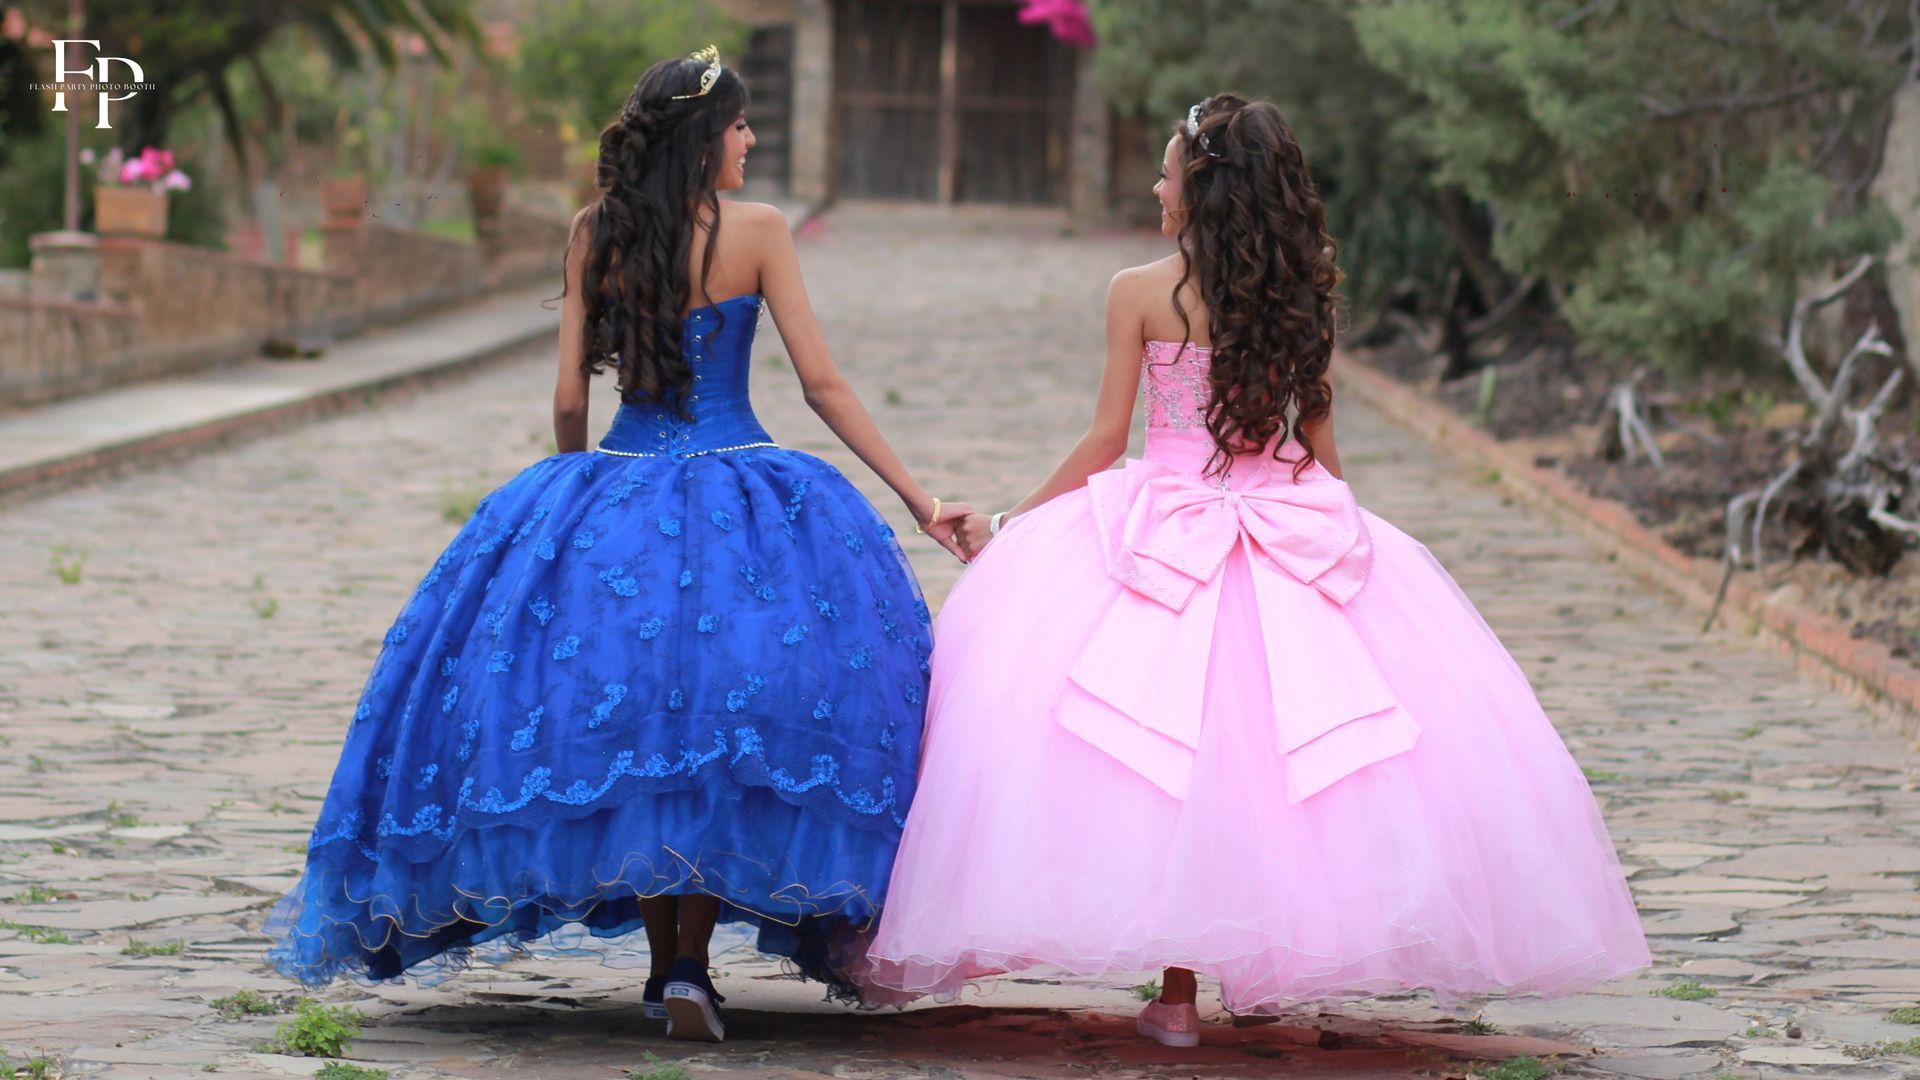 The quinceanera celebrant and her best friend in stunning gowns walking towards the quinceanera venue in Manor